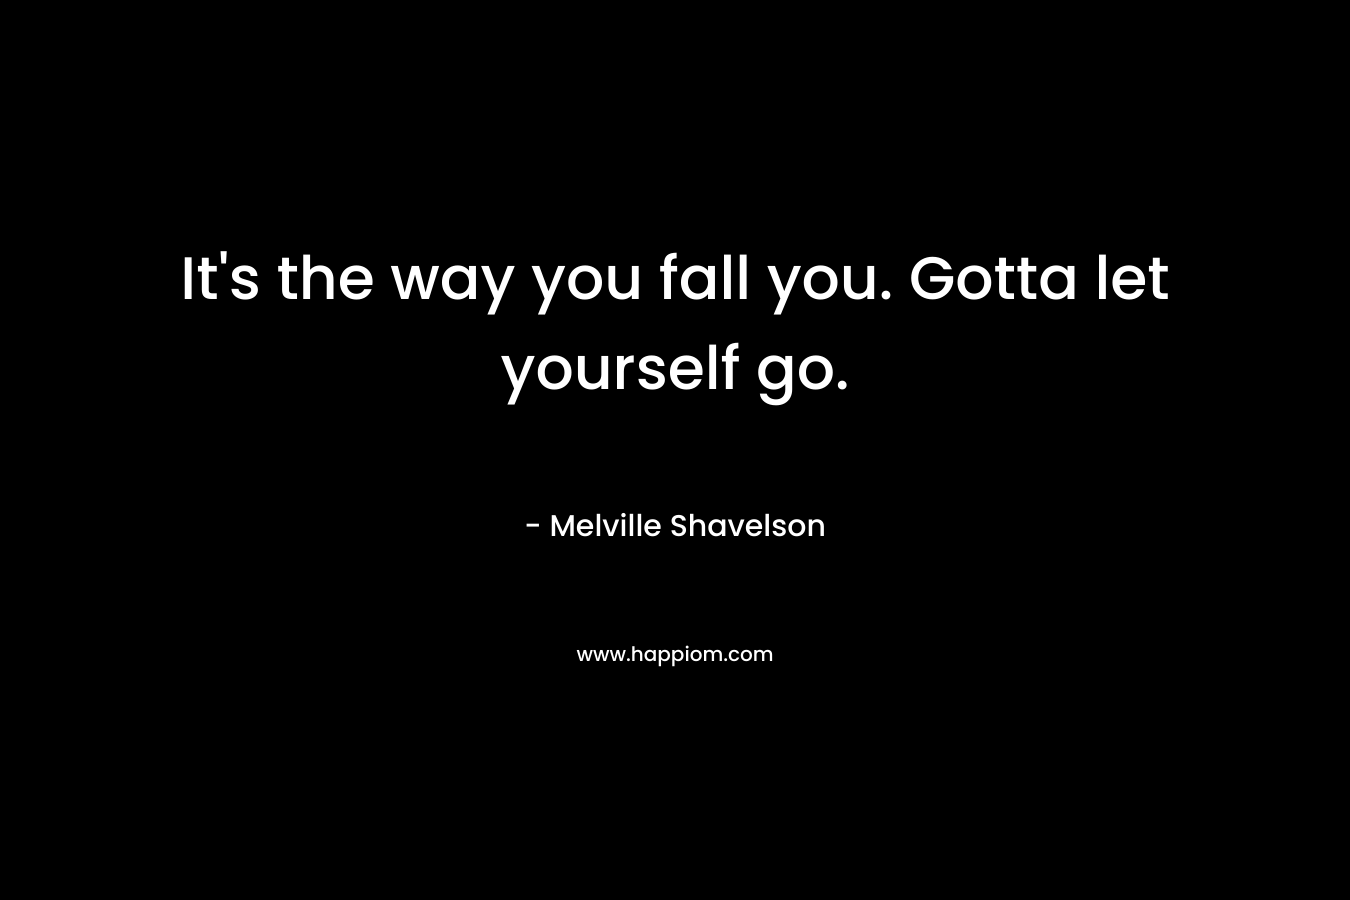 It’s the way you fall you. Gotta let yourself go. – Melville Shavelson